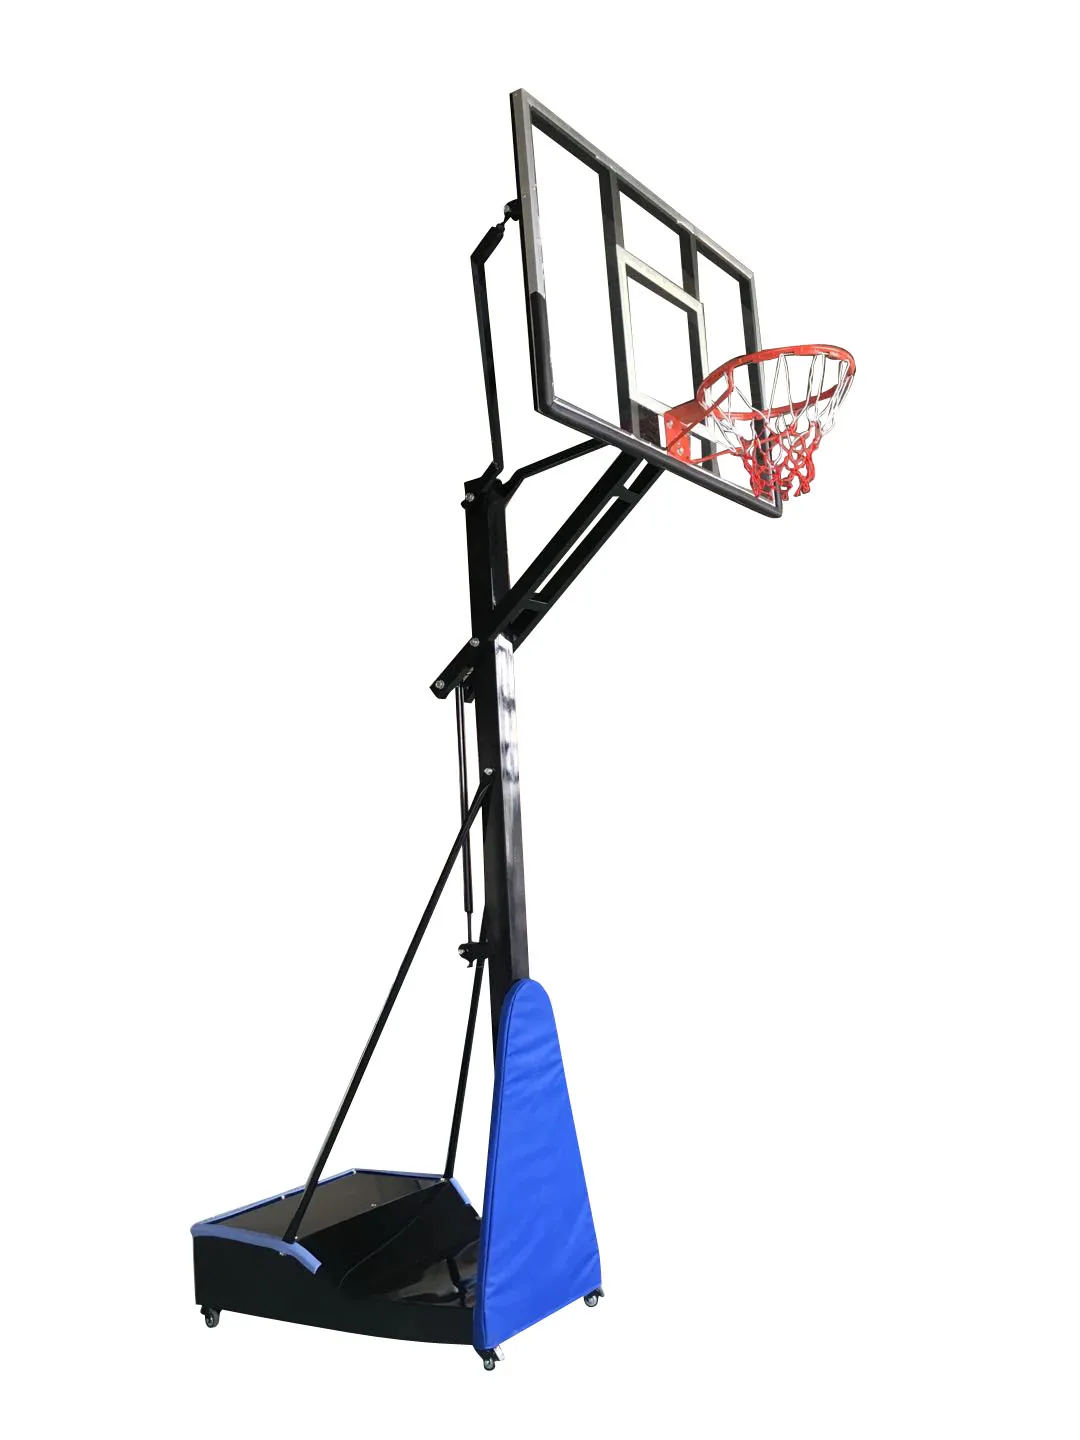 Best Price On Height Adjustable Basketball Goals For Training